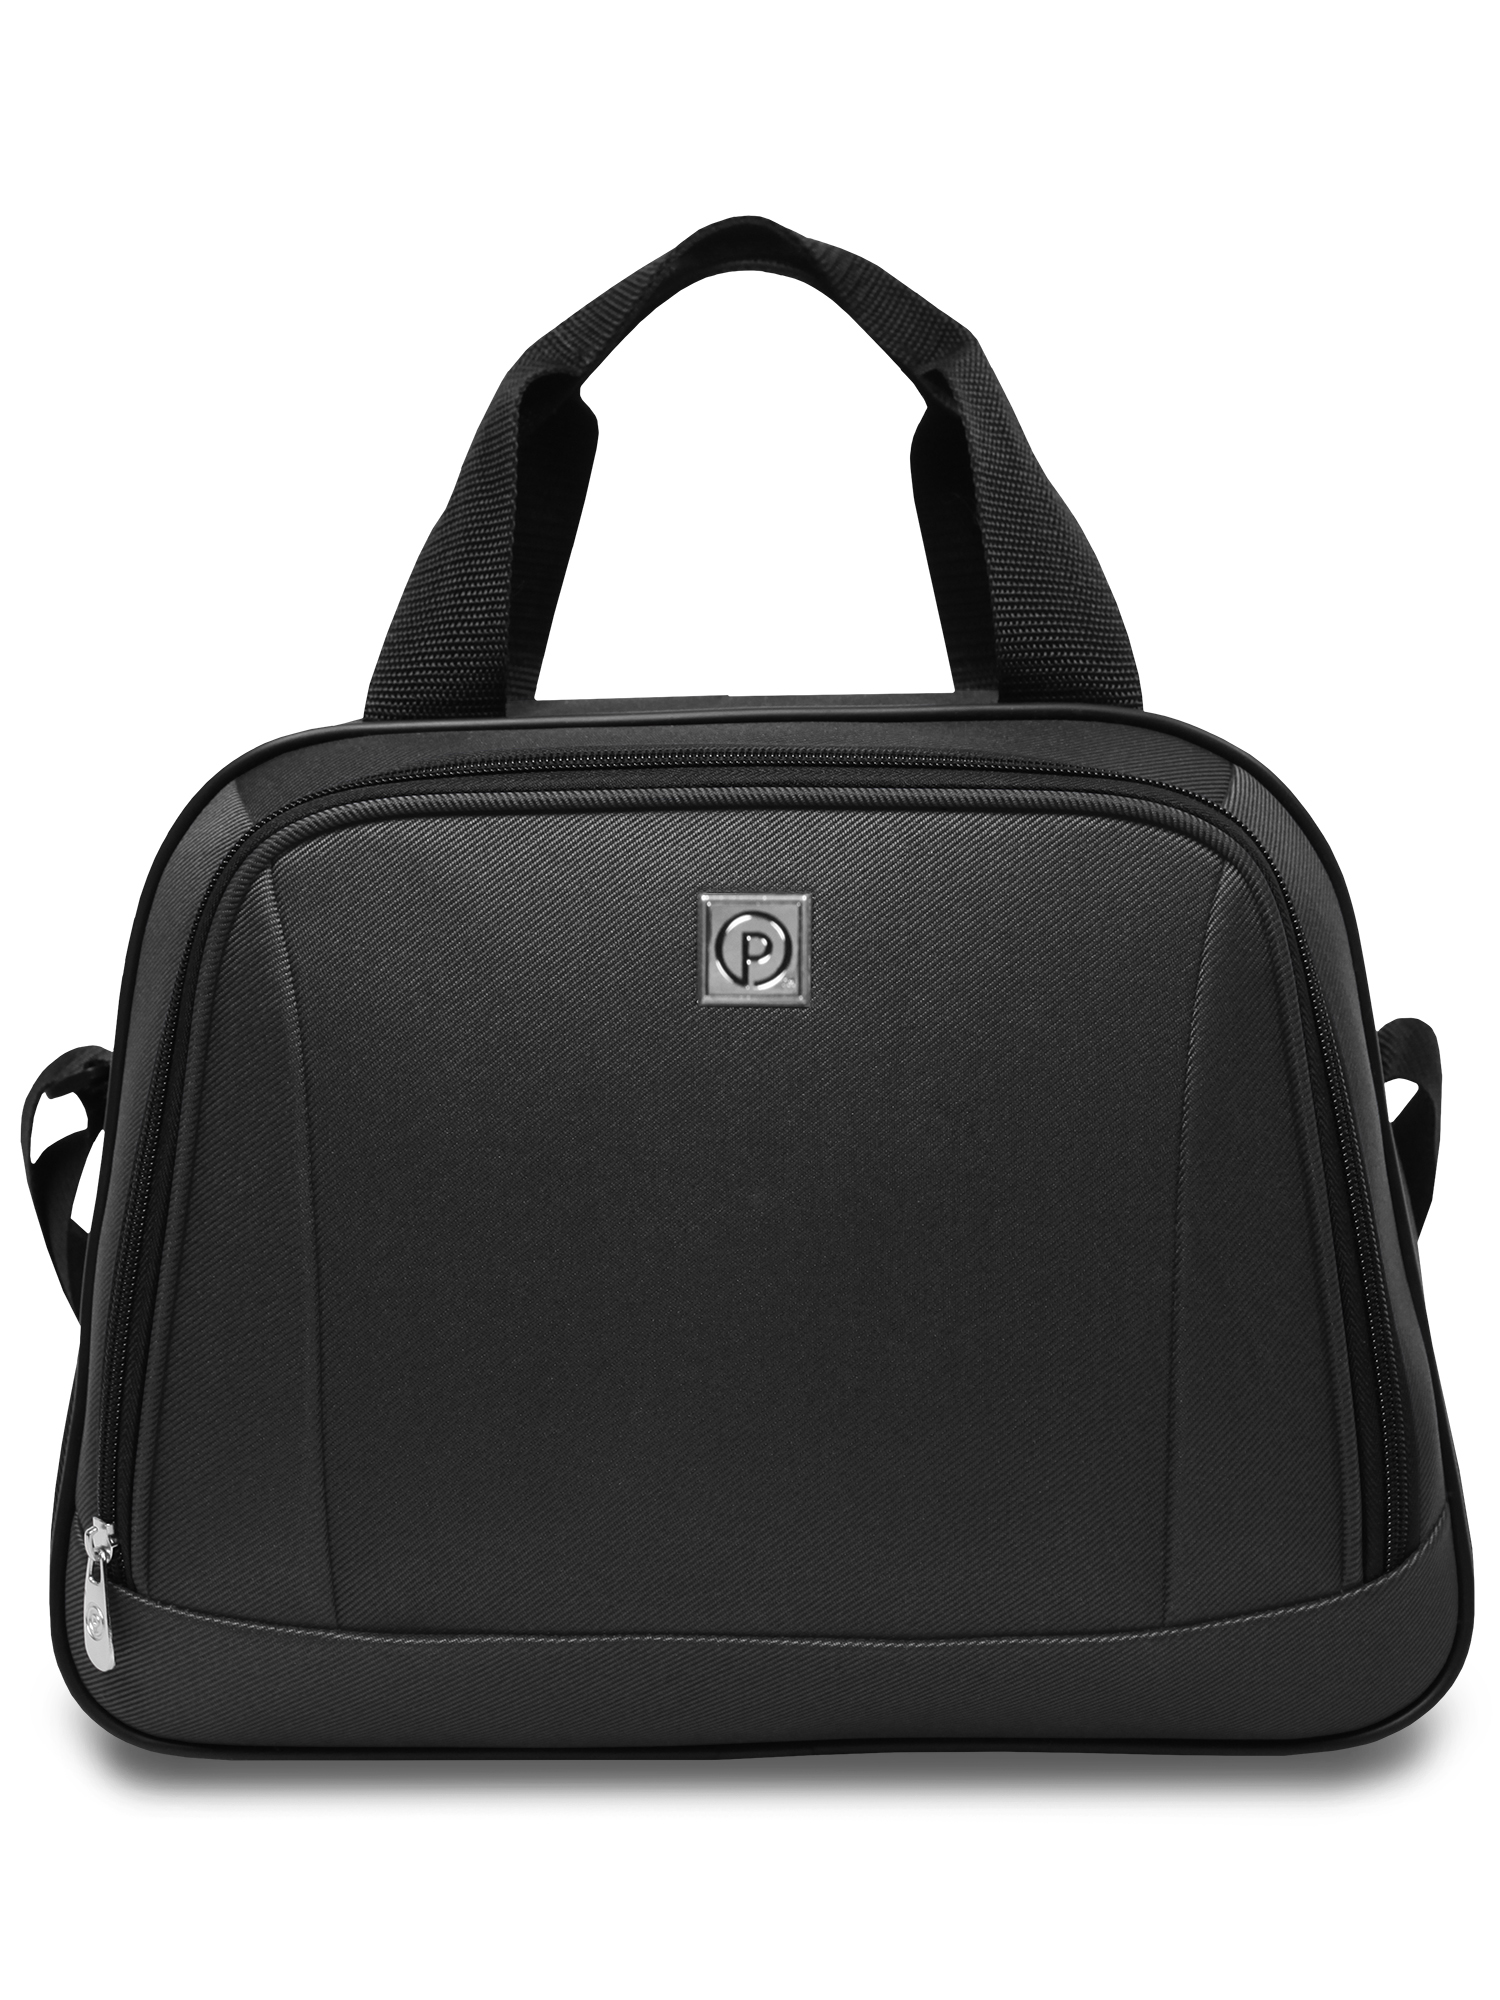 Protege 5 Piece Luggage Set w/ Carry on and Checked Bag, Dark Grey (Online Only) - image 3 of 12